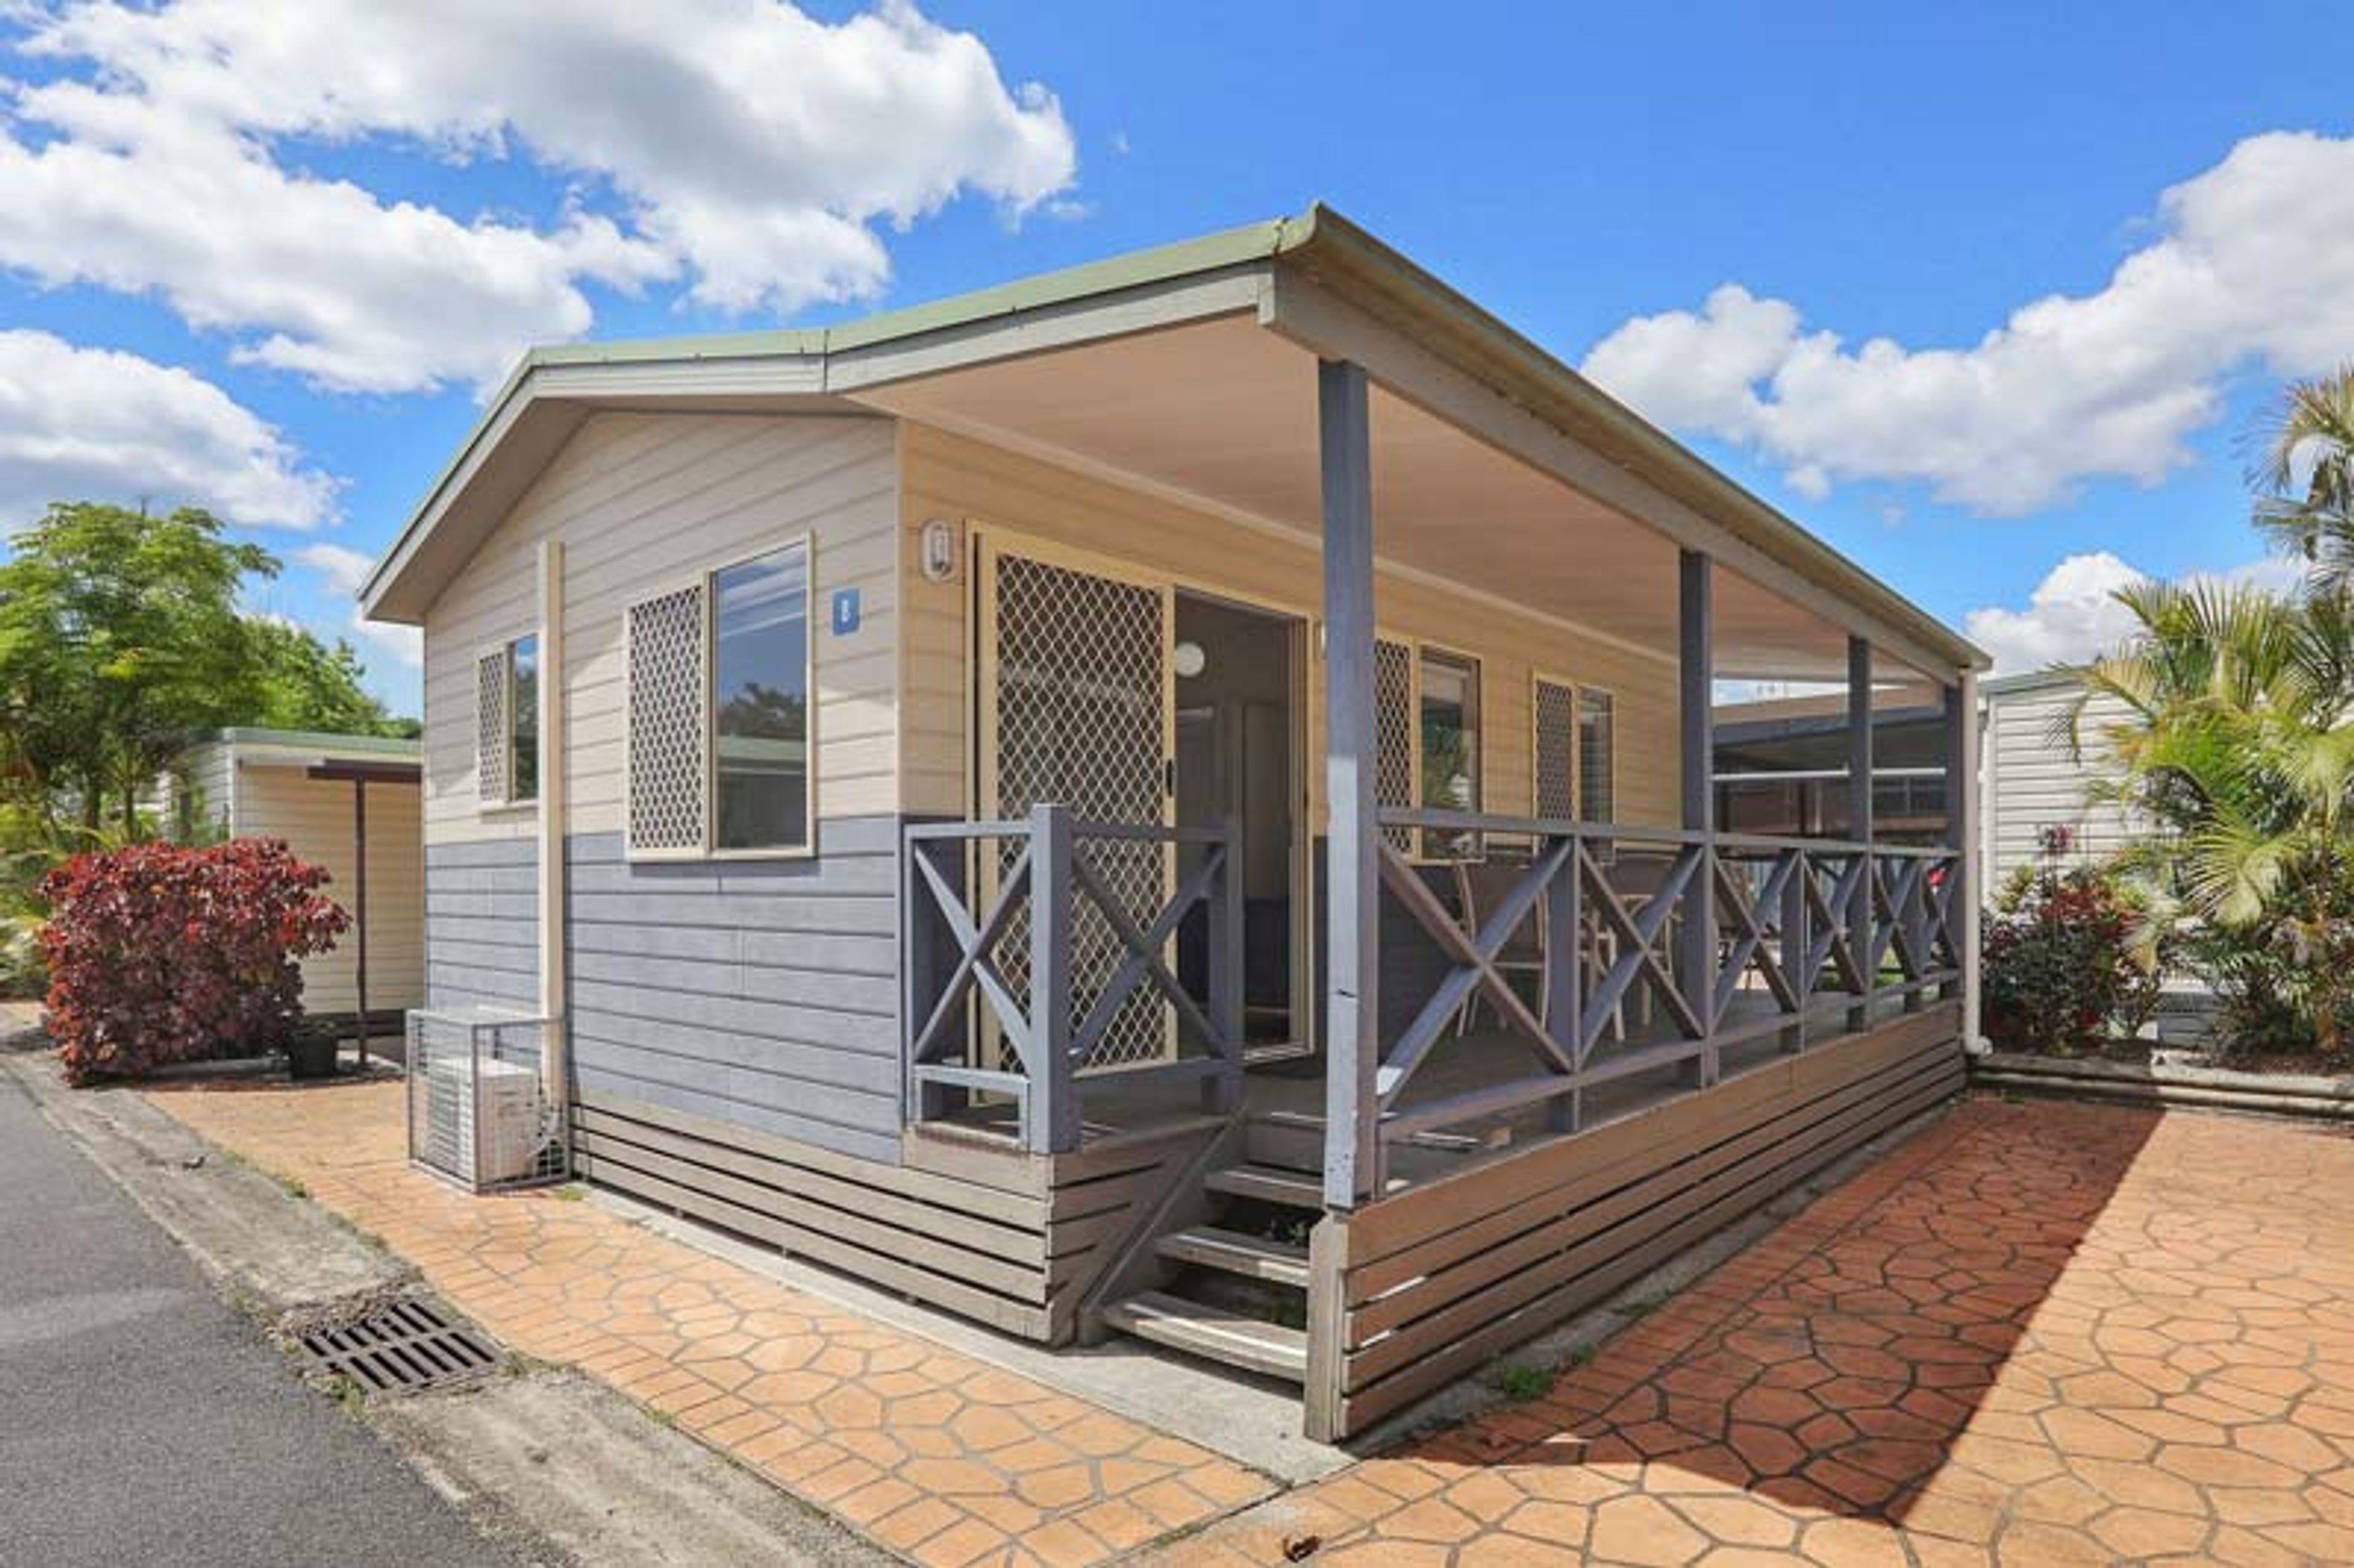 Tuncurry - Deluxe Cabin - Sleeps 5 - Dog Friendly 